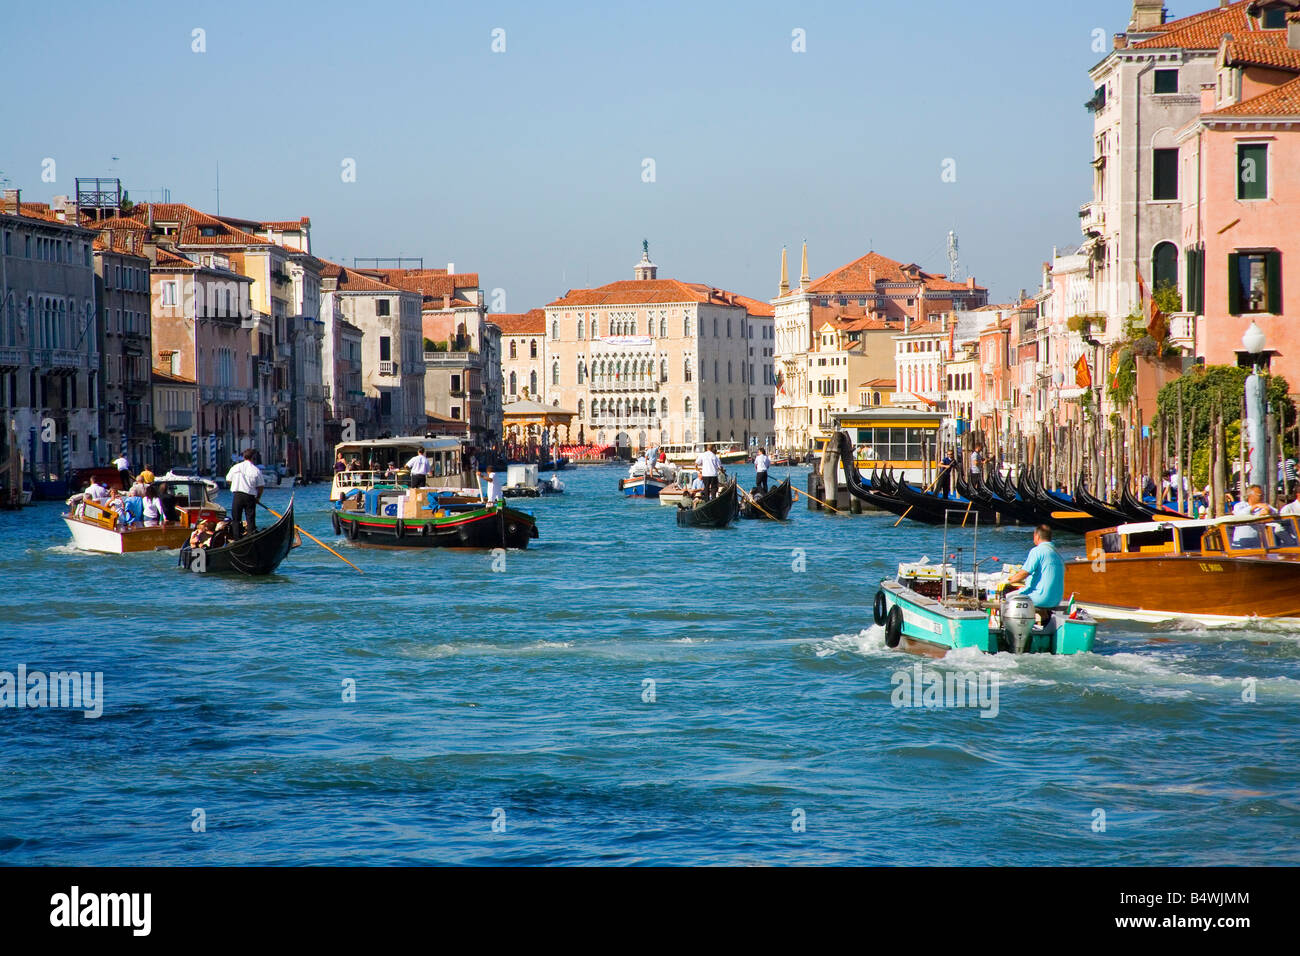 Busy water traffic on the Grand Canal in Venice Stock Photo